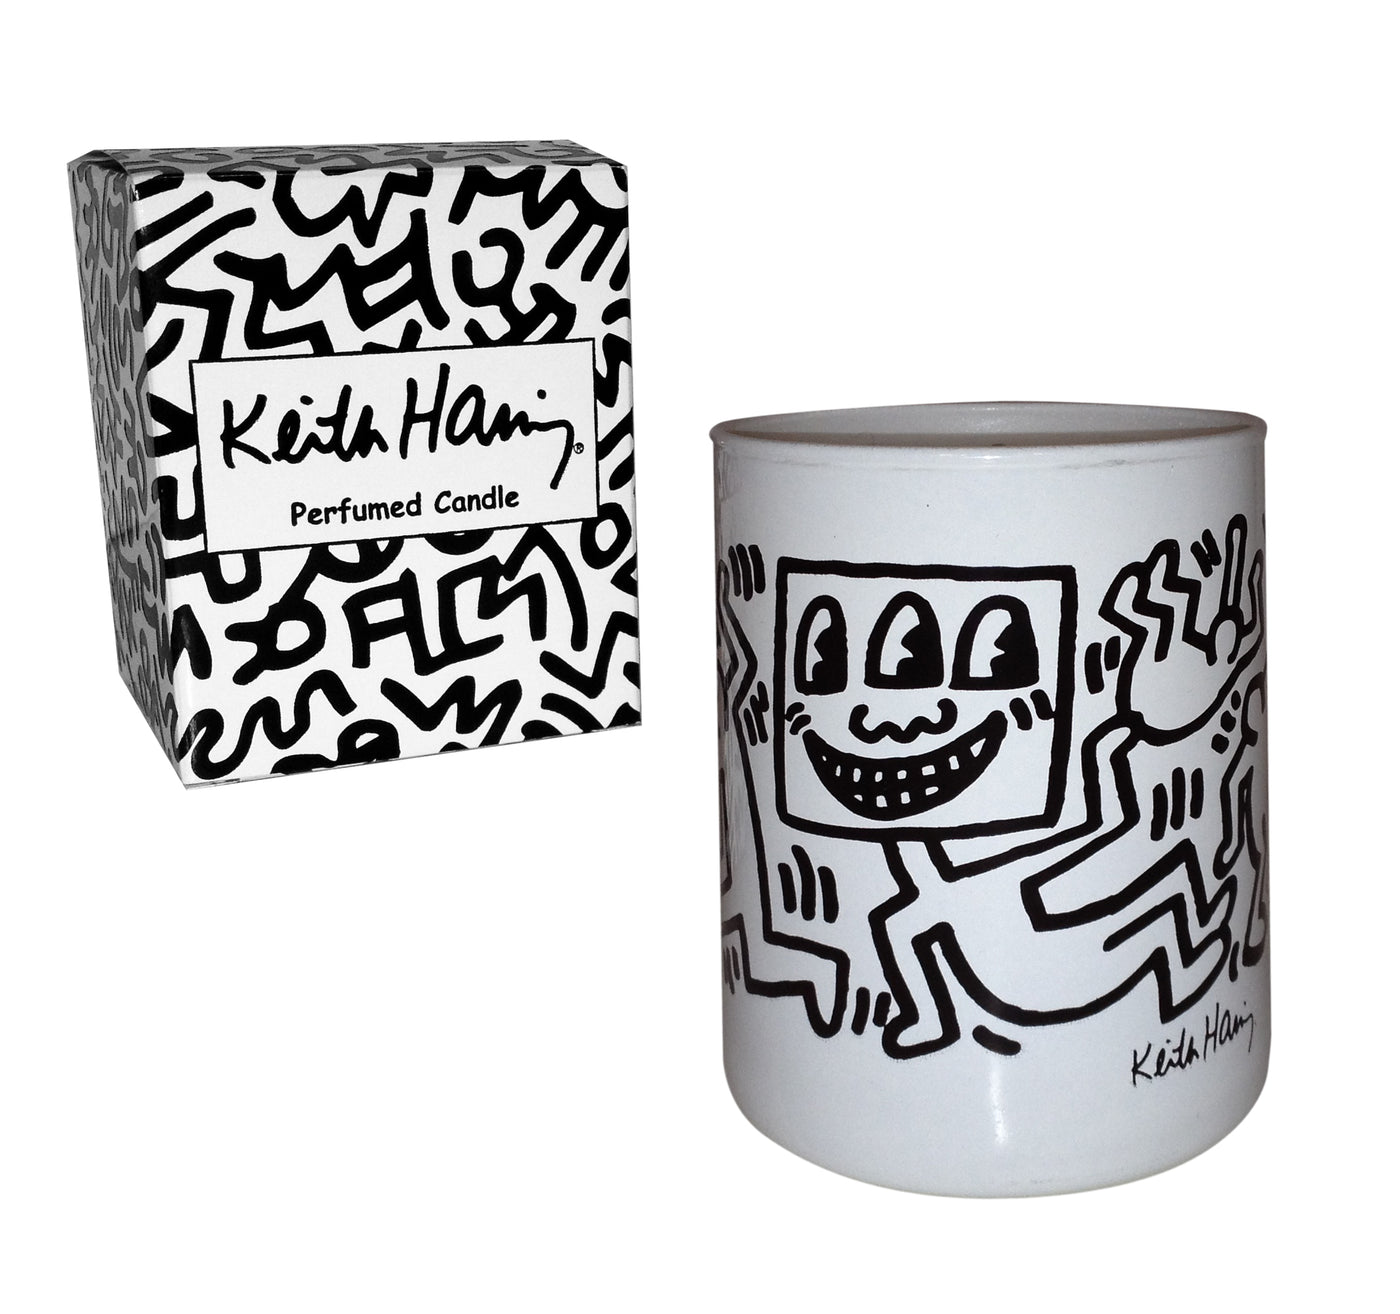 Keith Haring White Candle Black Men Drawings